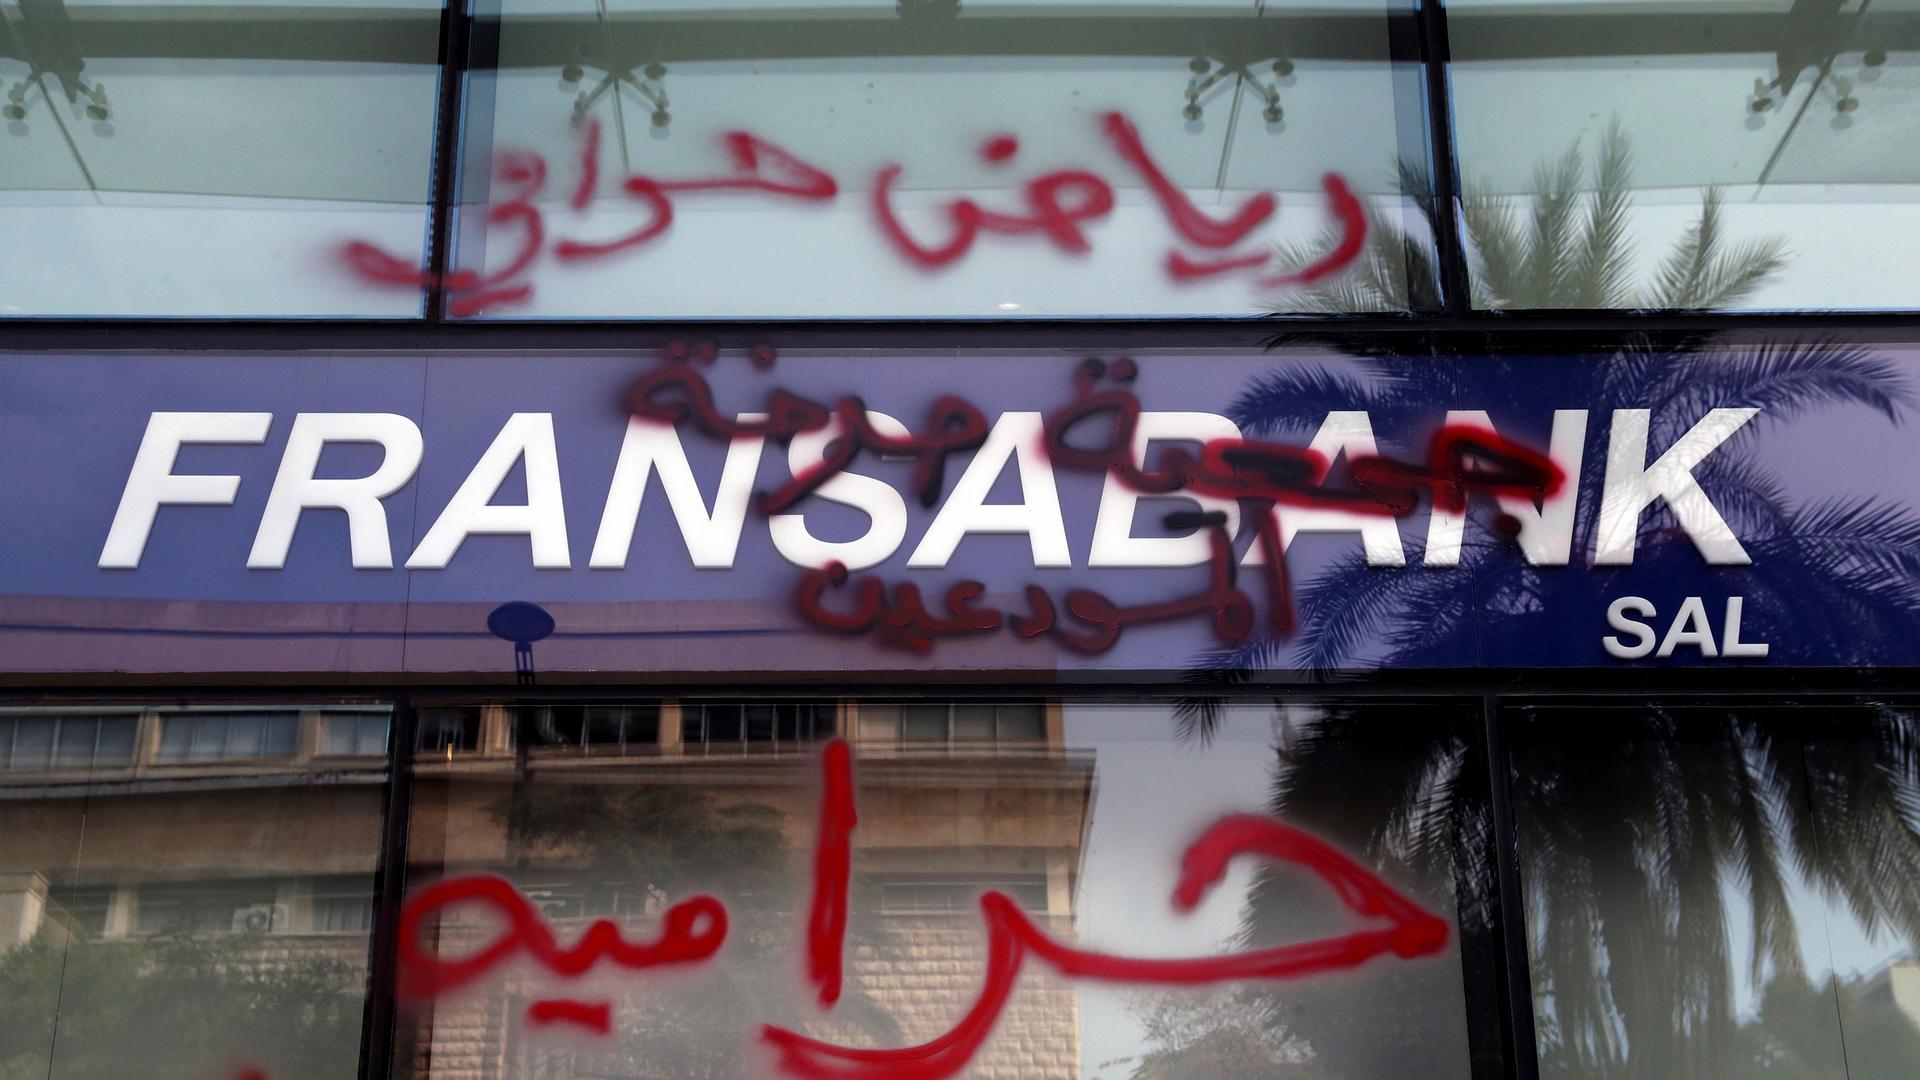 Bank customers write Arabic words thats read "Riad is a thief. Thieves" (Riad Salameh, the governor of Lebanon's Central Bank) on a facade of bank in Beirut, Lebanon, Friday, Nov. 19, 2021. 